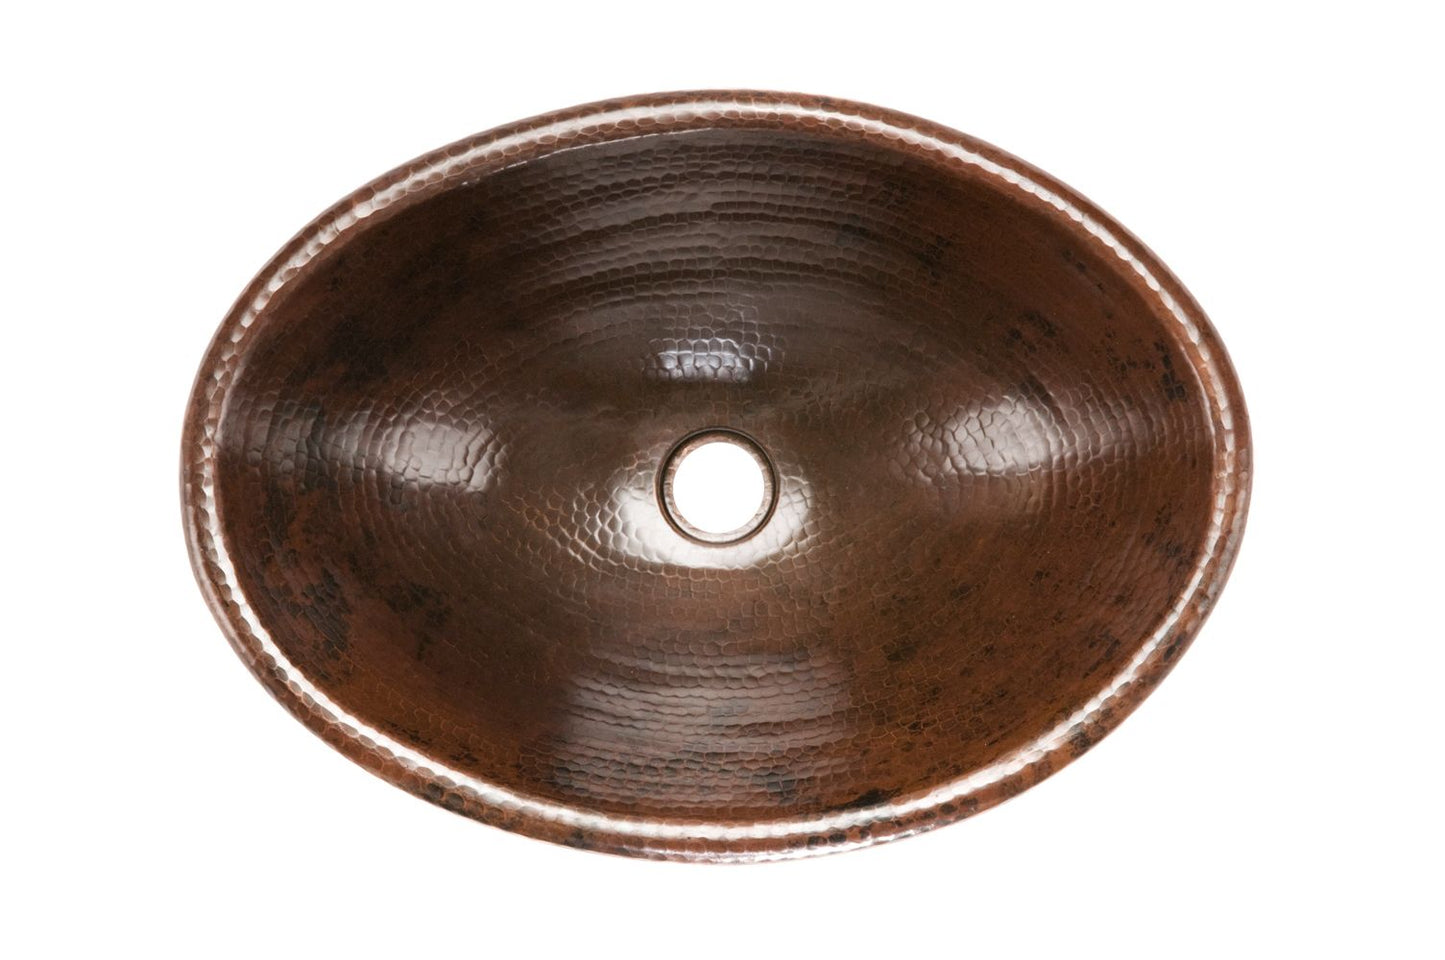 Oval Self Rimming Hammered Copper Sink with Antique Marble Faucet - |VESIMI Design| Luxury and Rustic bathrooms online